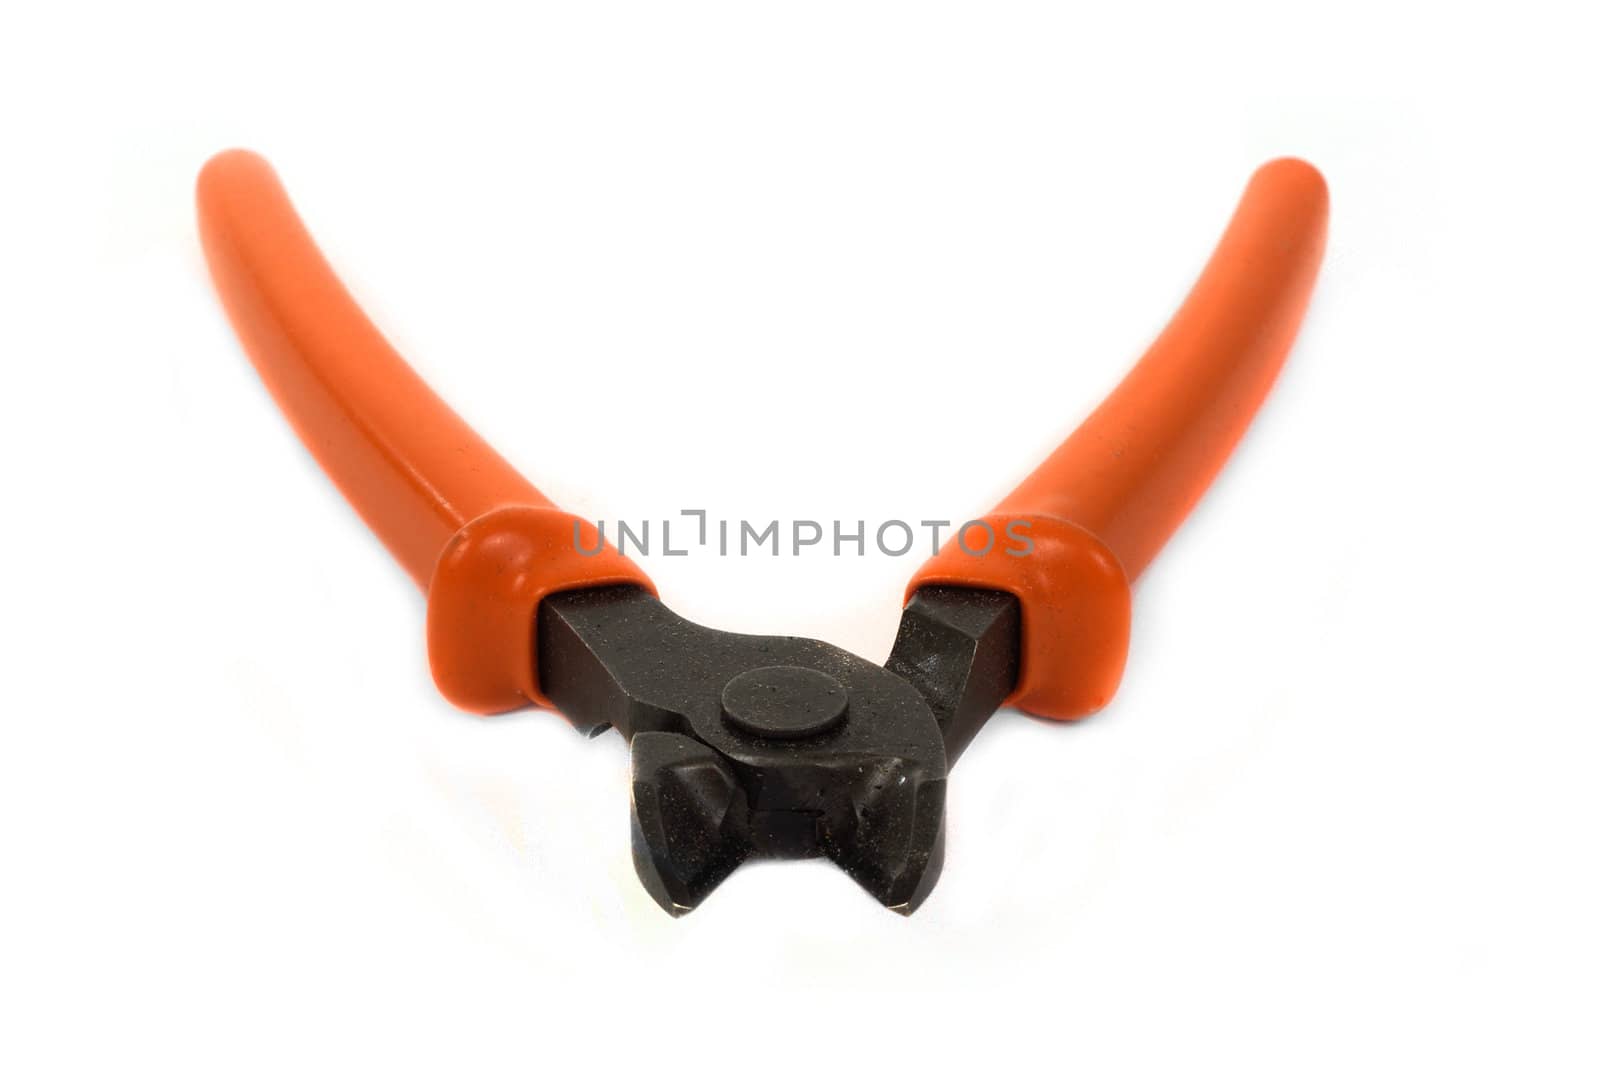 Close up of wire cutter jaws, isolated over white background